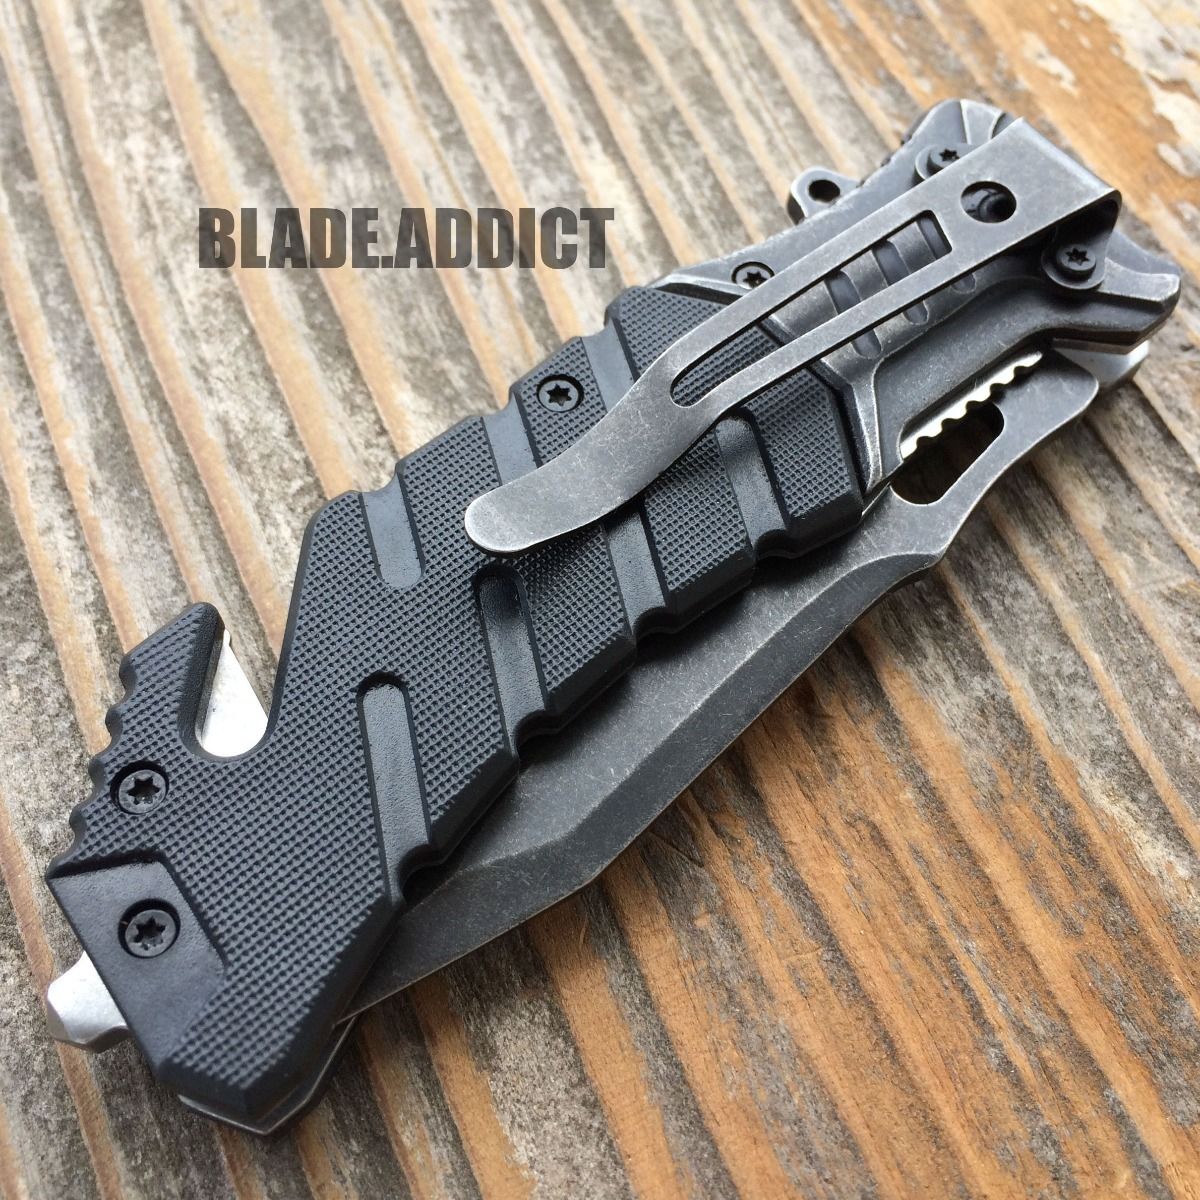 8" BALLISTIC Tactical Combat Spring Assisted Open Pocket Rescue Knife